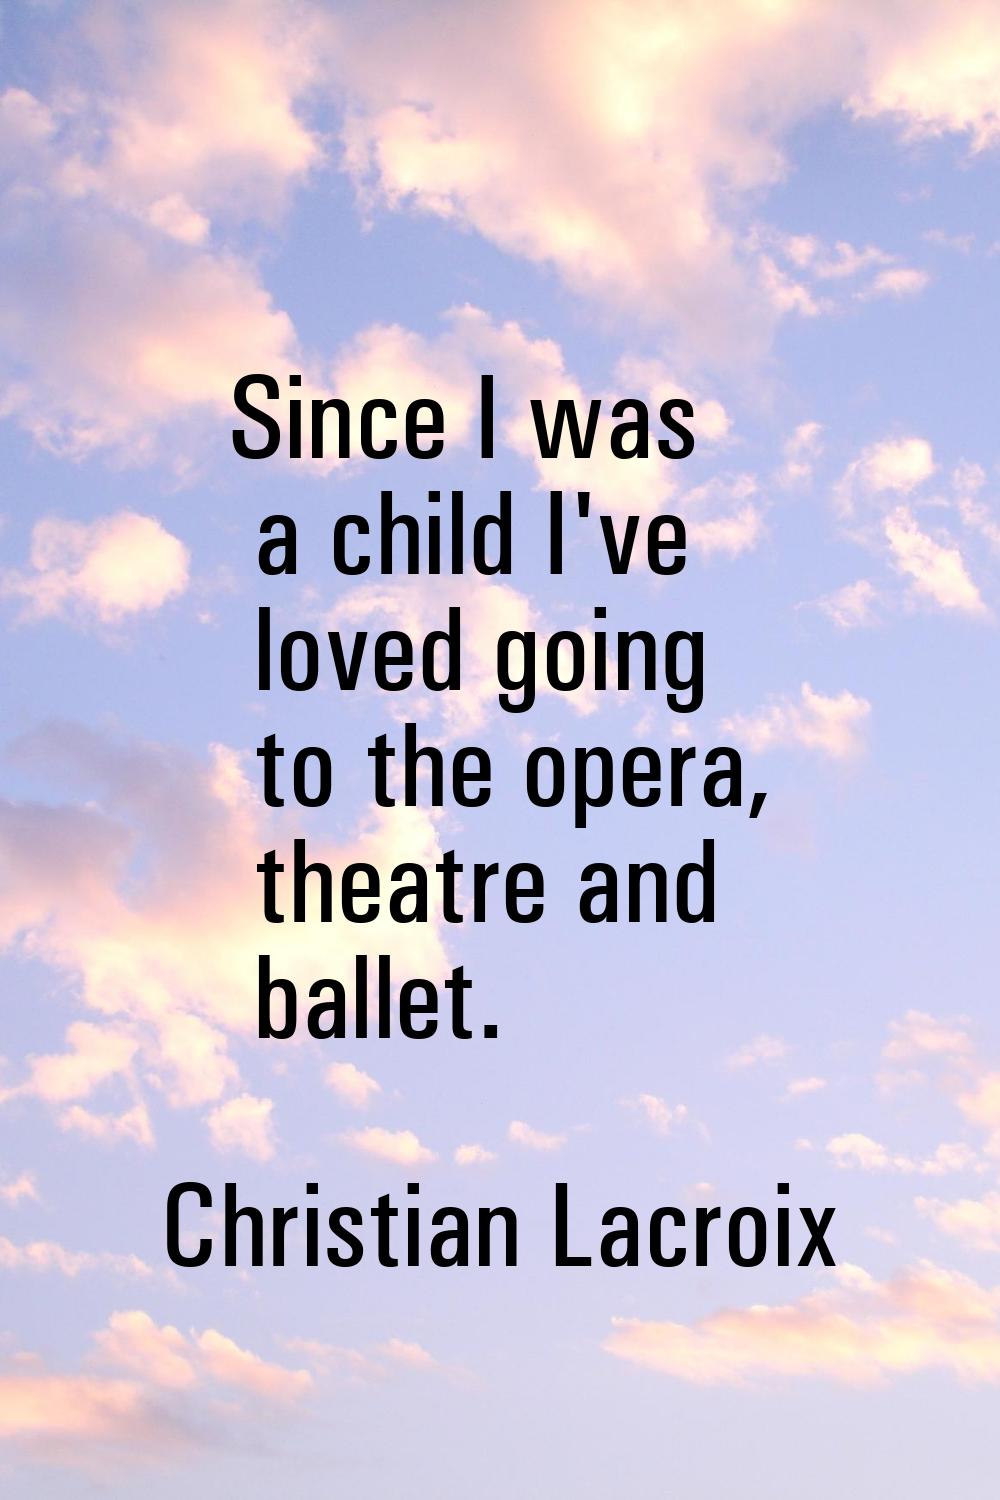 Since I was a child I've loved going to the opera, theatre and ballet.